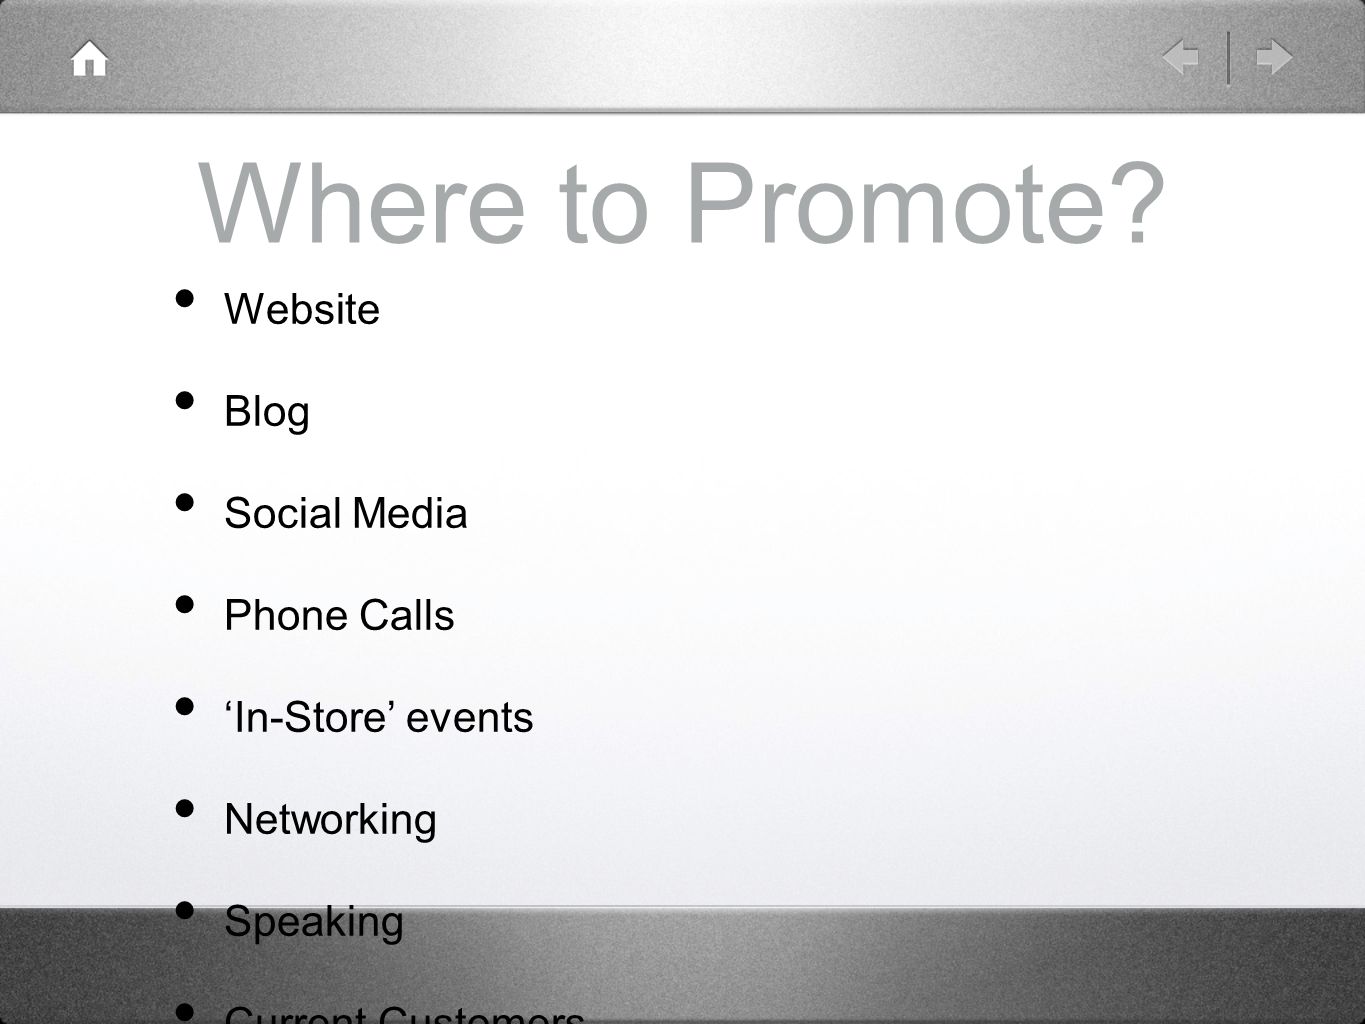 Where to Promote.